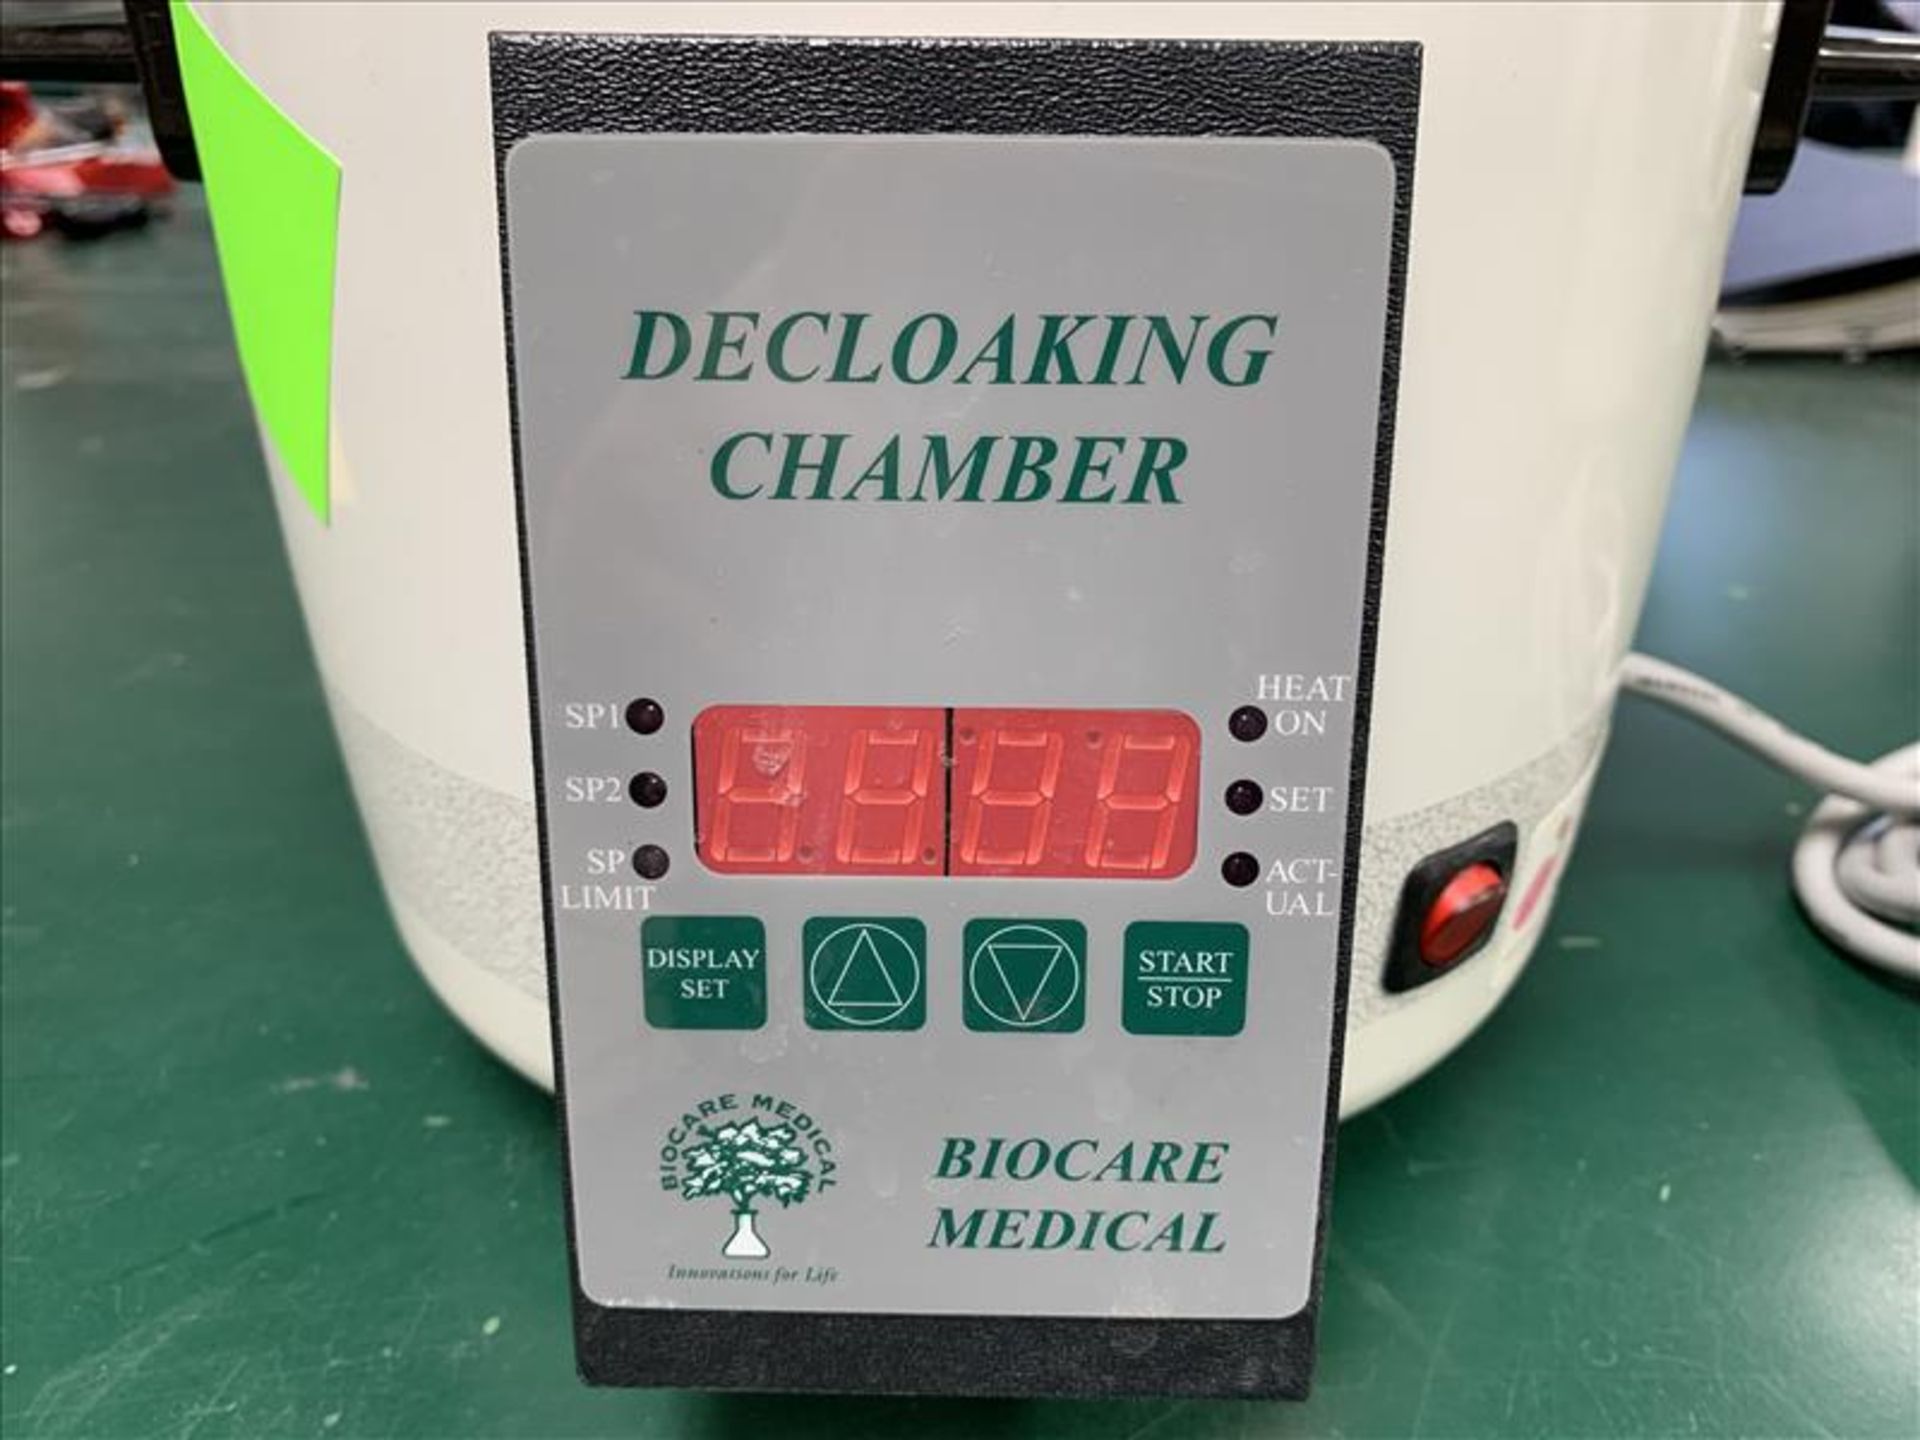 Bio-Care Medical Decloaking Chamber mod. DC2002 S/N DC1232 - Image 2 of 2